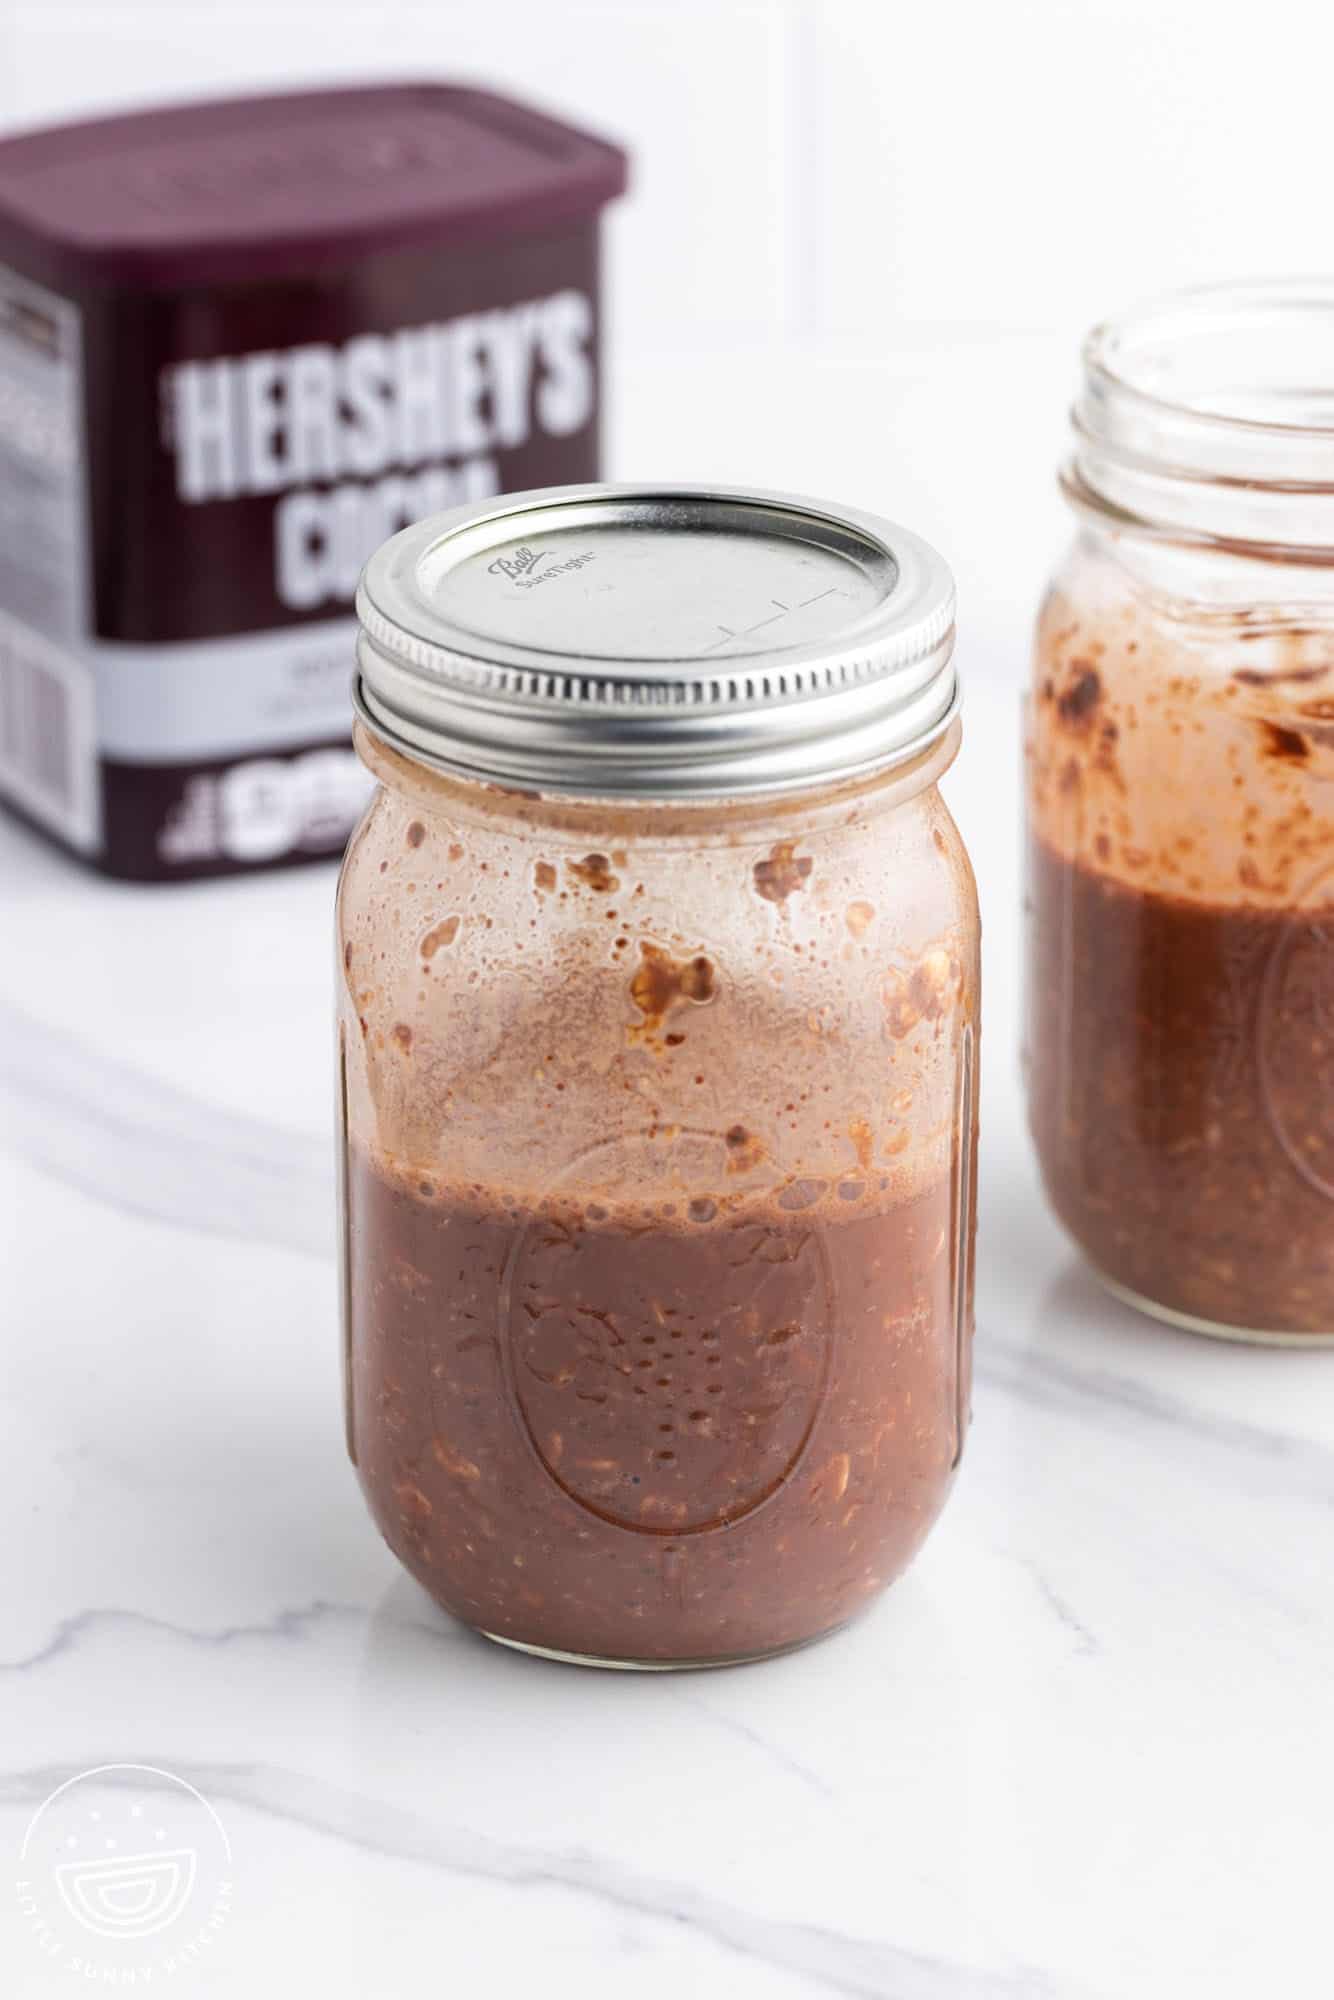 two mason jars of chocolate overnight oats in front of a container of Hershey's cocoa.